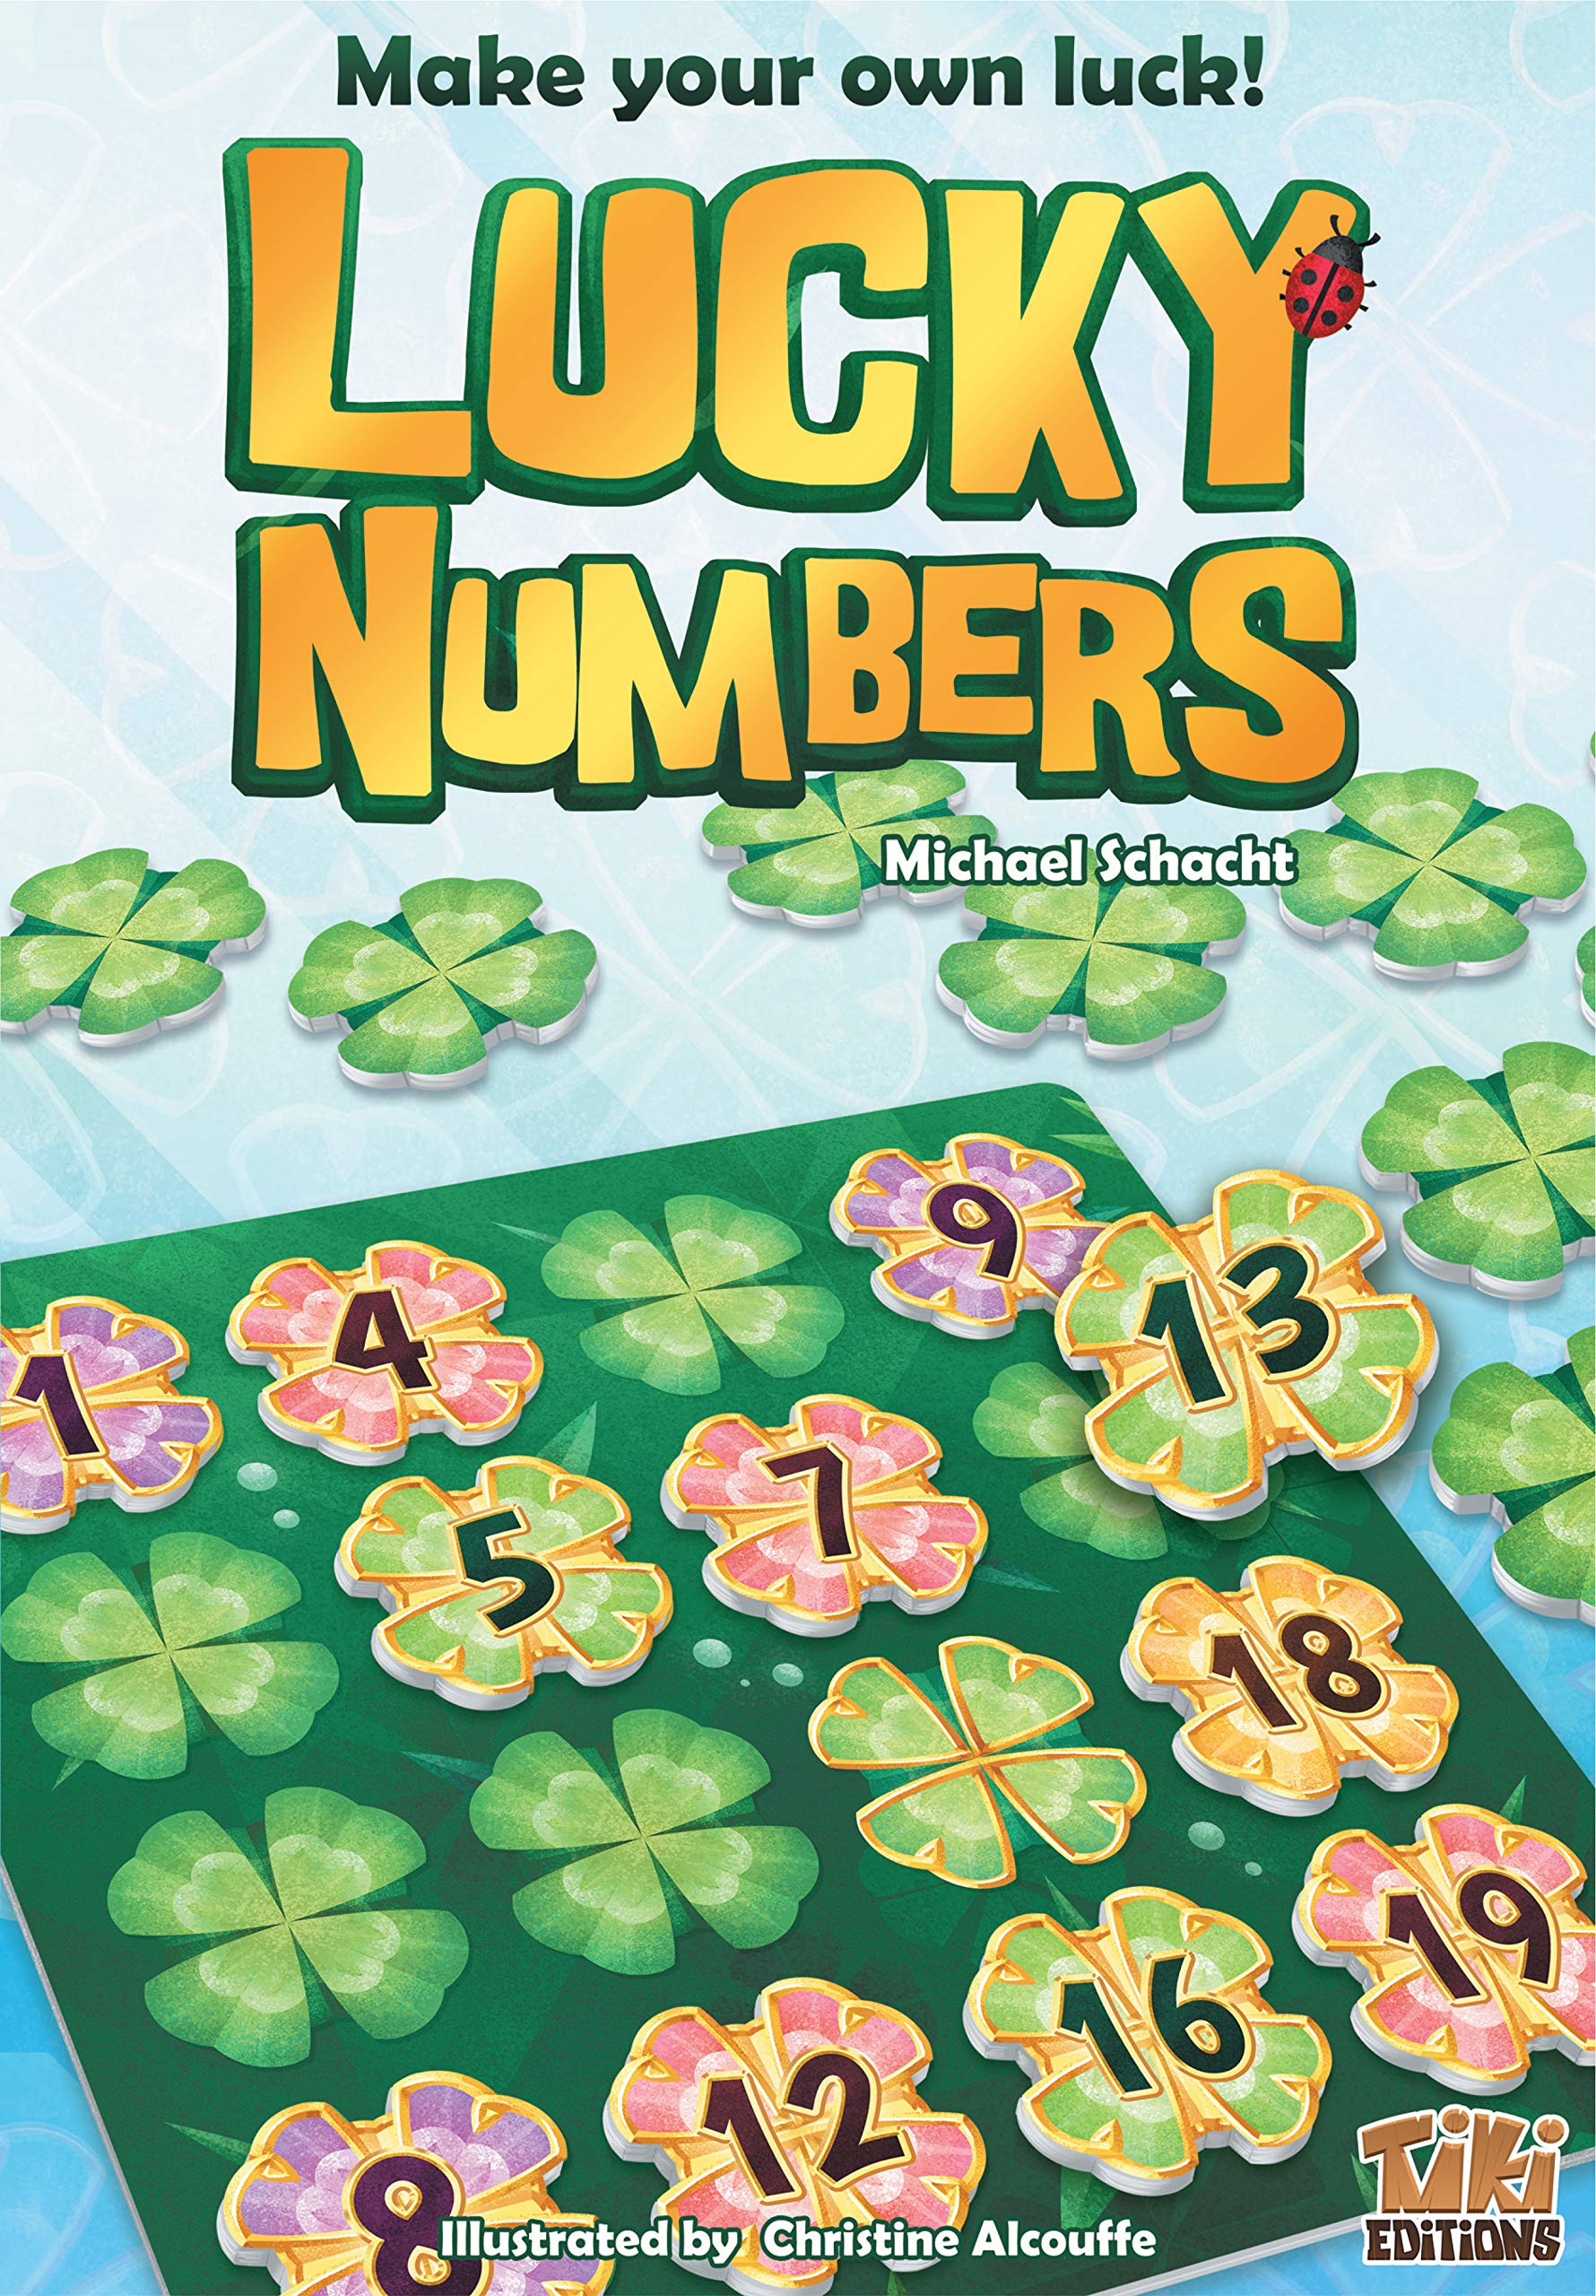 Tiki Editions Lucky Numbers - Be First to Complete Your Garden; 1 Rule - Numbers in Each Row & Each Column Must be Arranged in Ascending Order; Draw, Place or Swap Clovers, 1-4 Players, 20 min, 8+